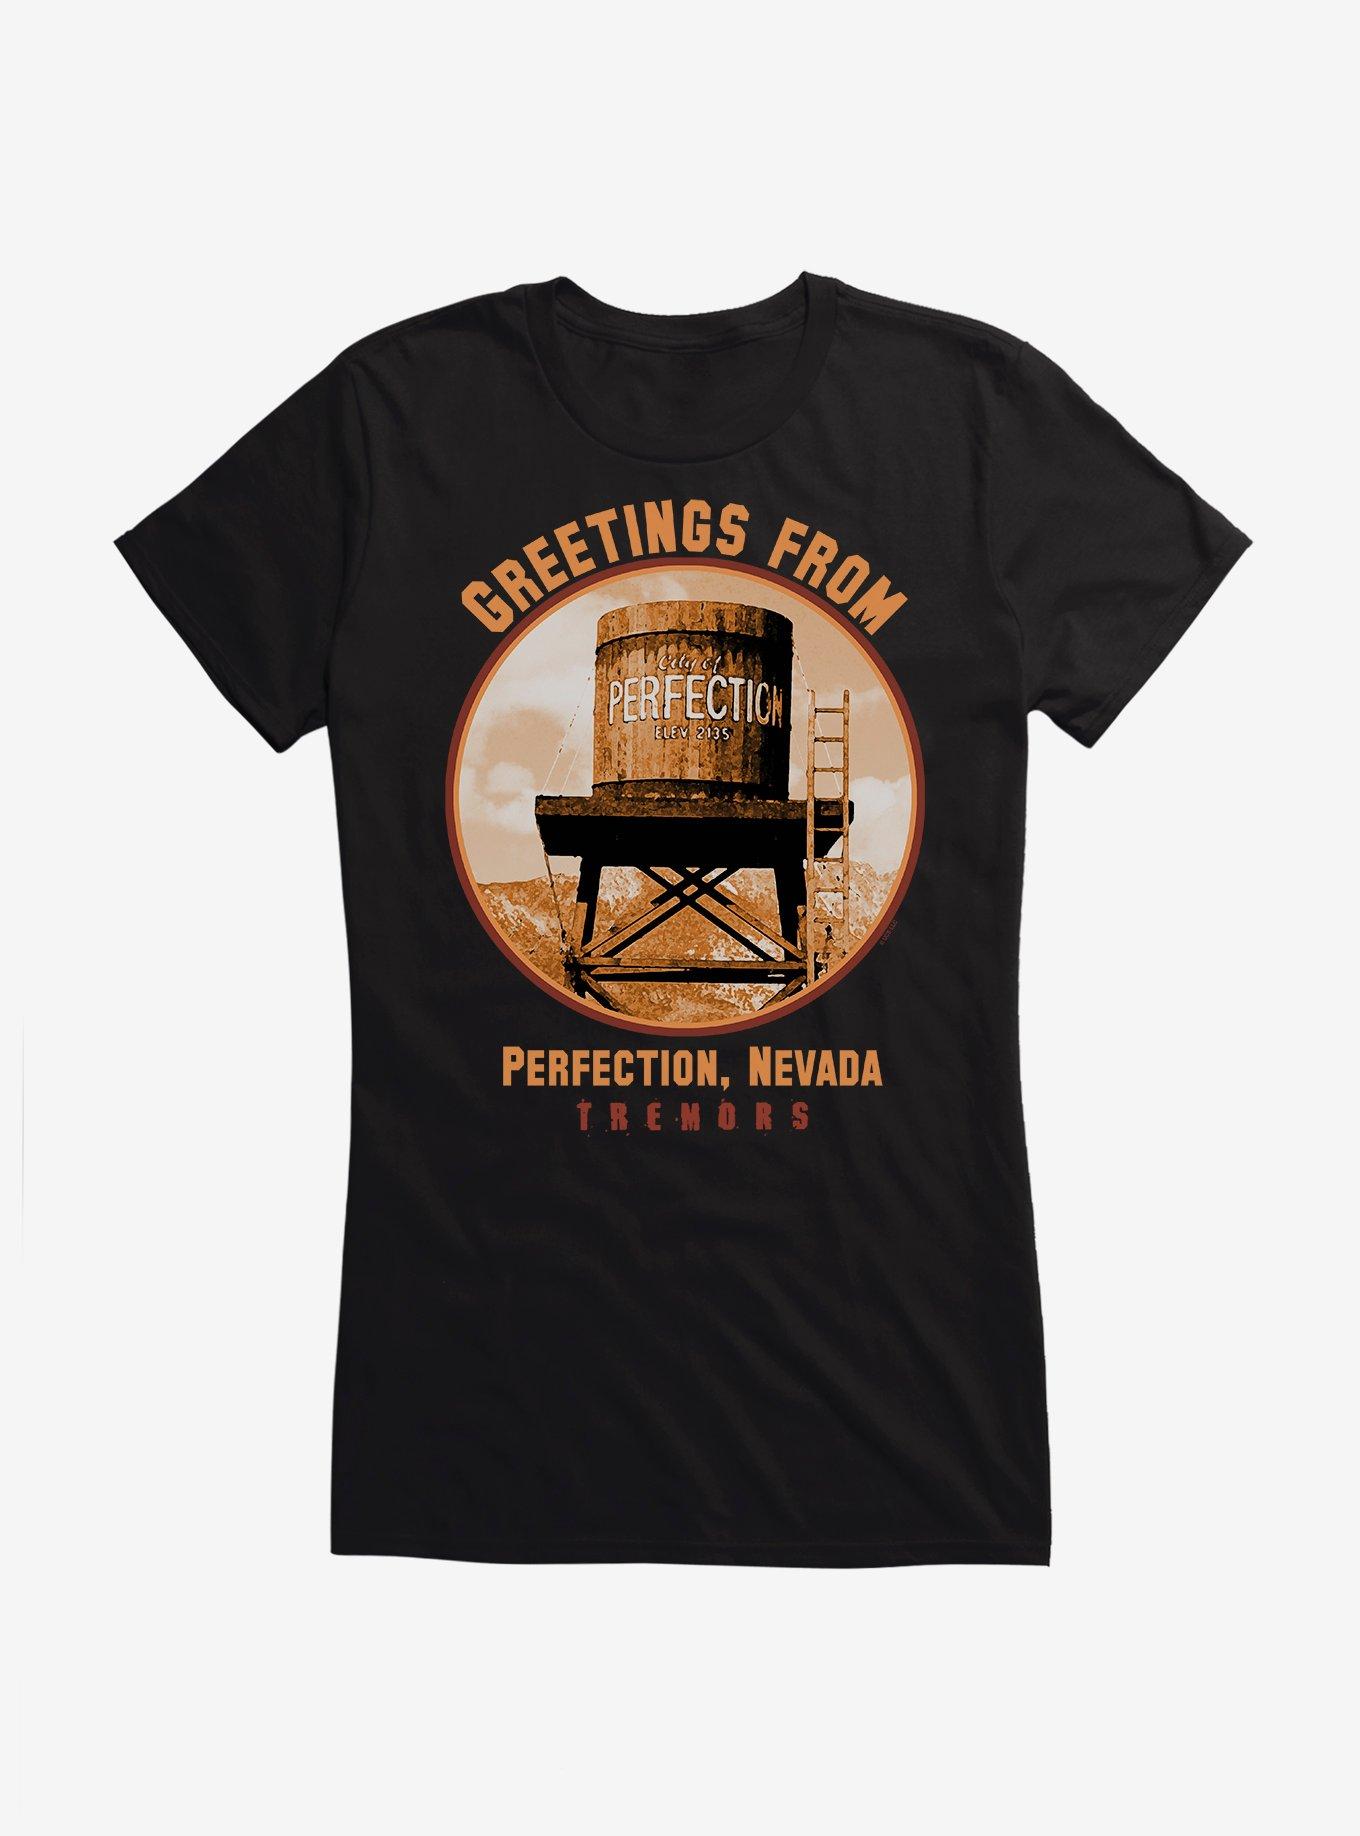 Tremors Greetings From City Of Perfection Girls T-Shirt